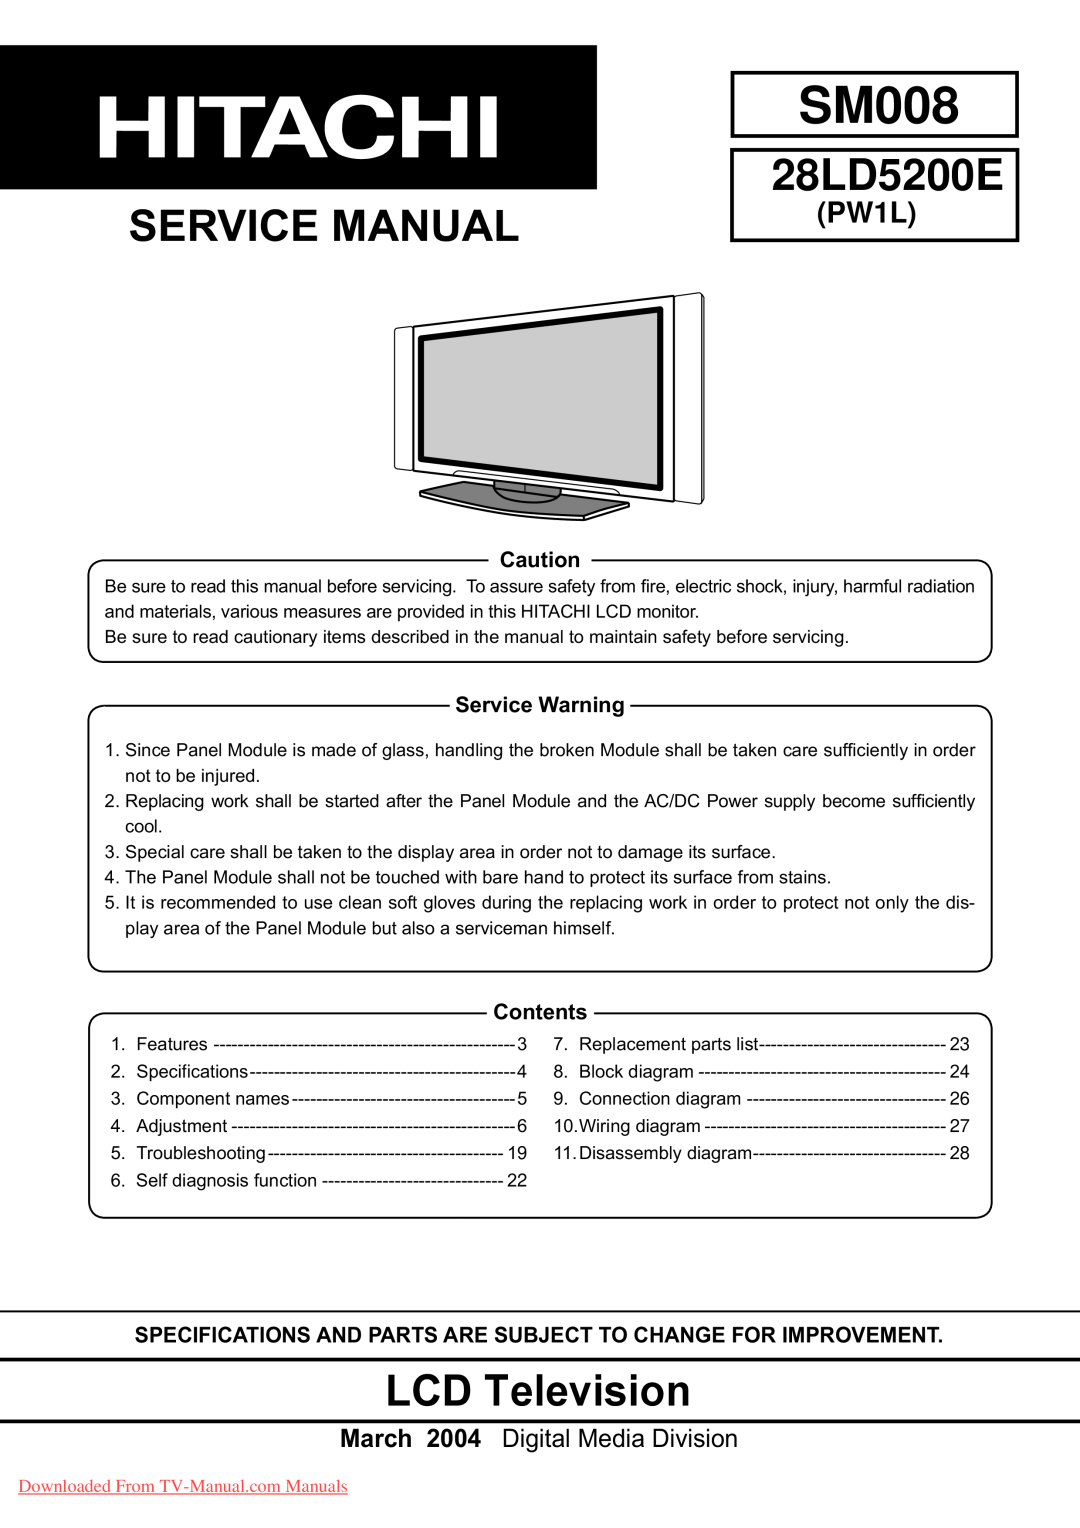 Hitachi 28LD5200E specifications Service Manual, LCD Television, Service Warning, Contents, SM008, PW1L 